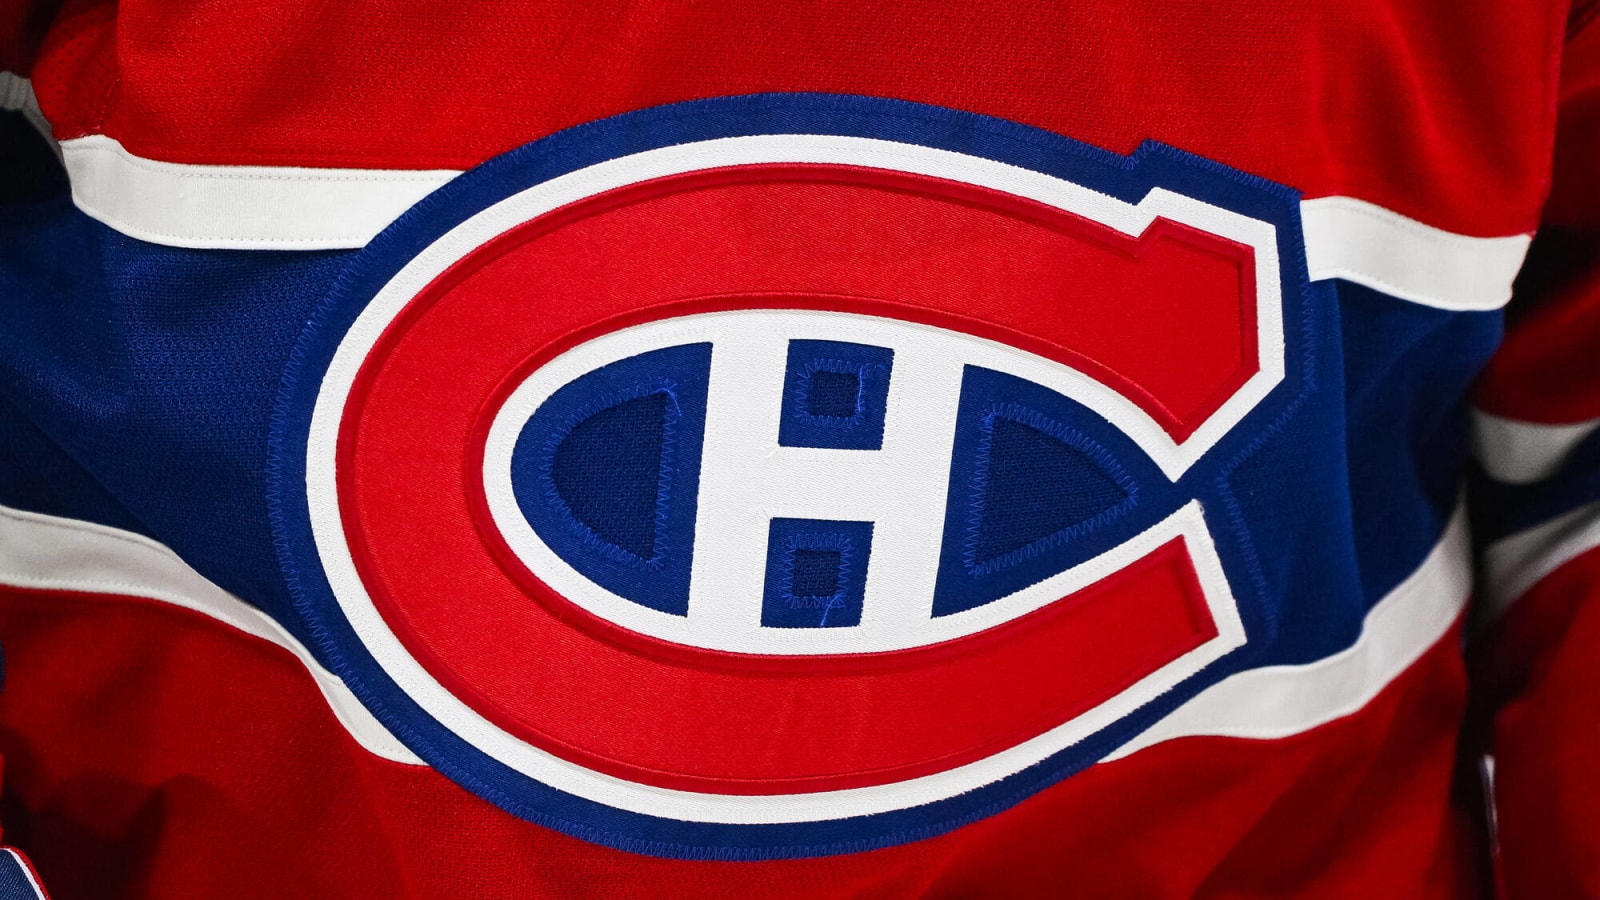 The use of latest salary retention will tell us a lot about the Habs’ vision